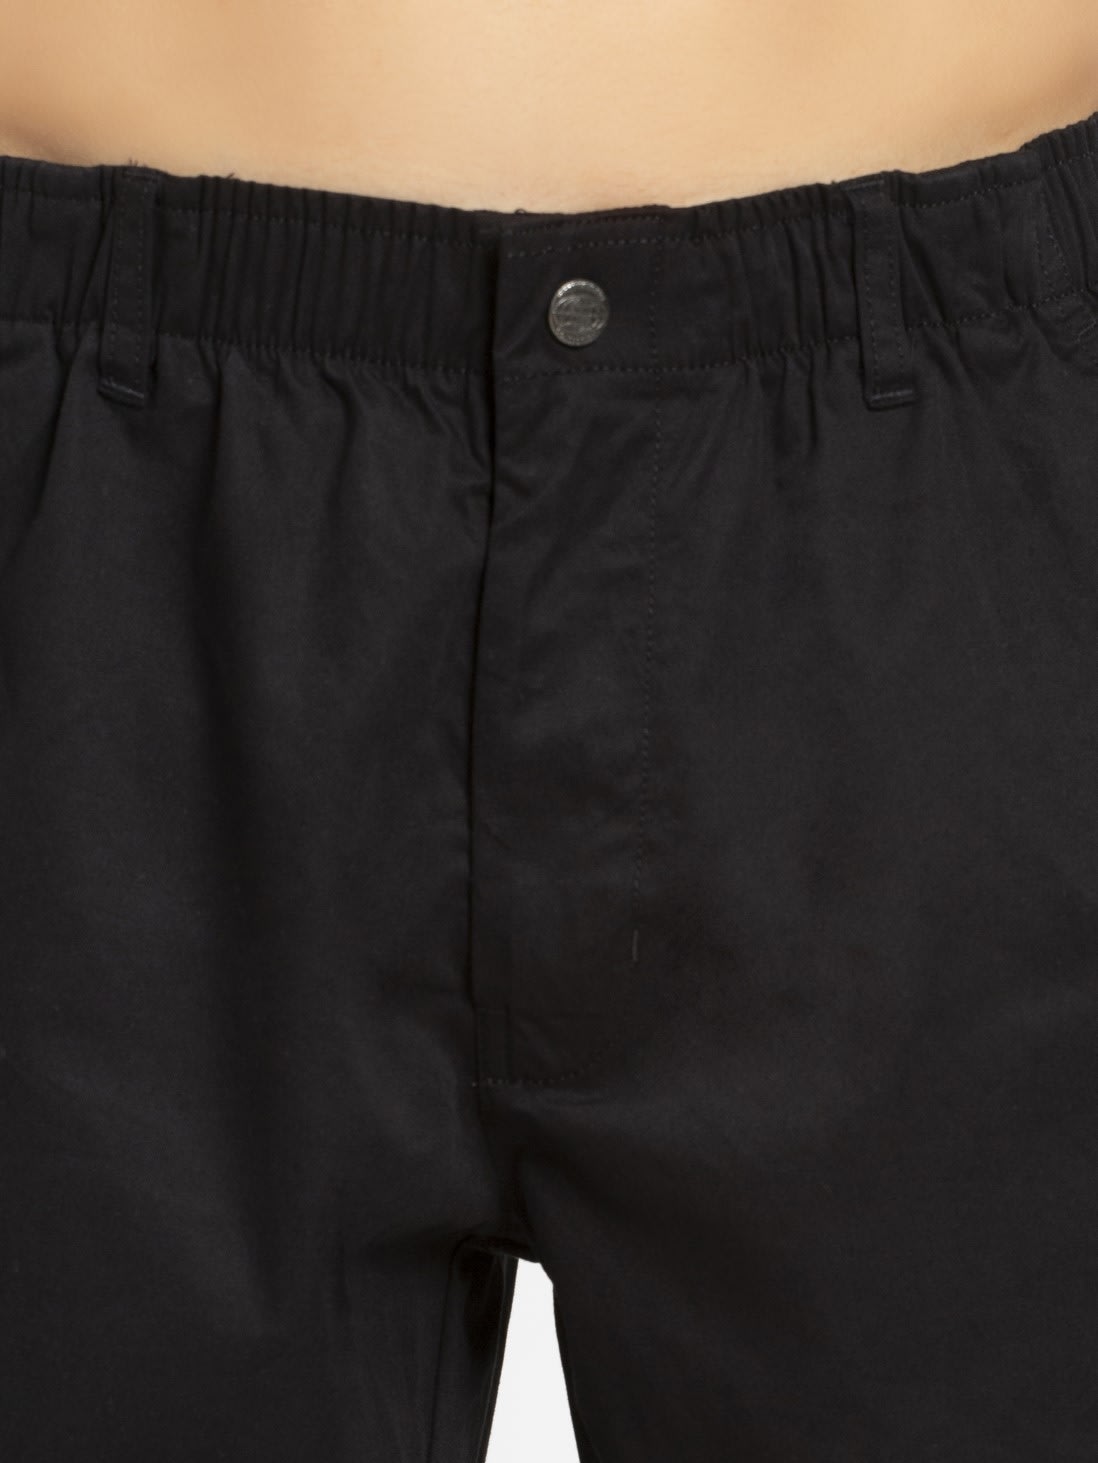 Buy Black Shorts with Button & Zipper Fly Closure for Men 1203 | Jockey ...